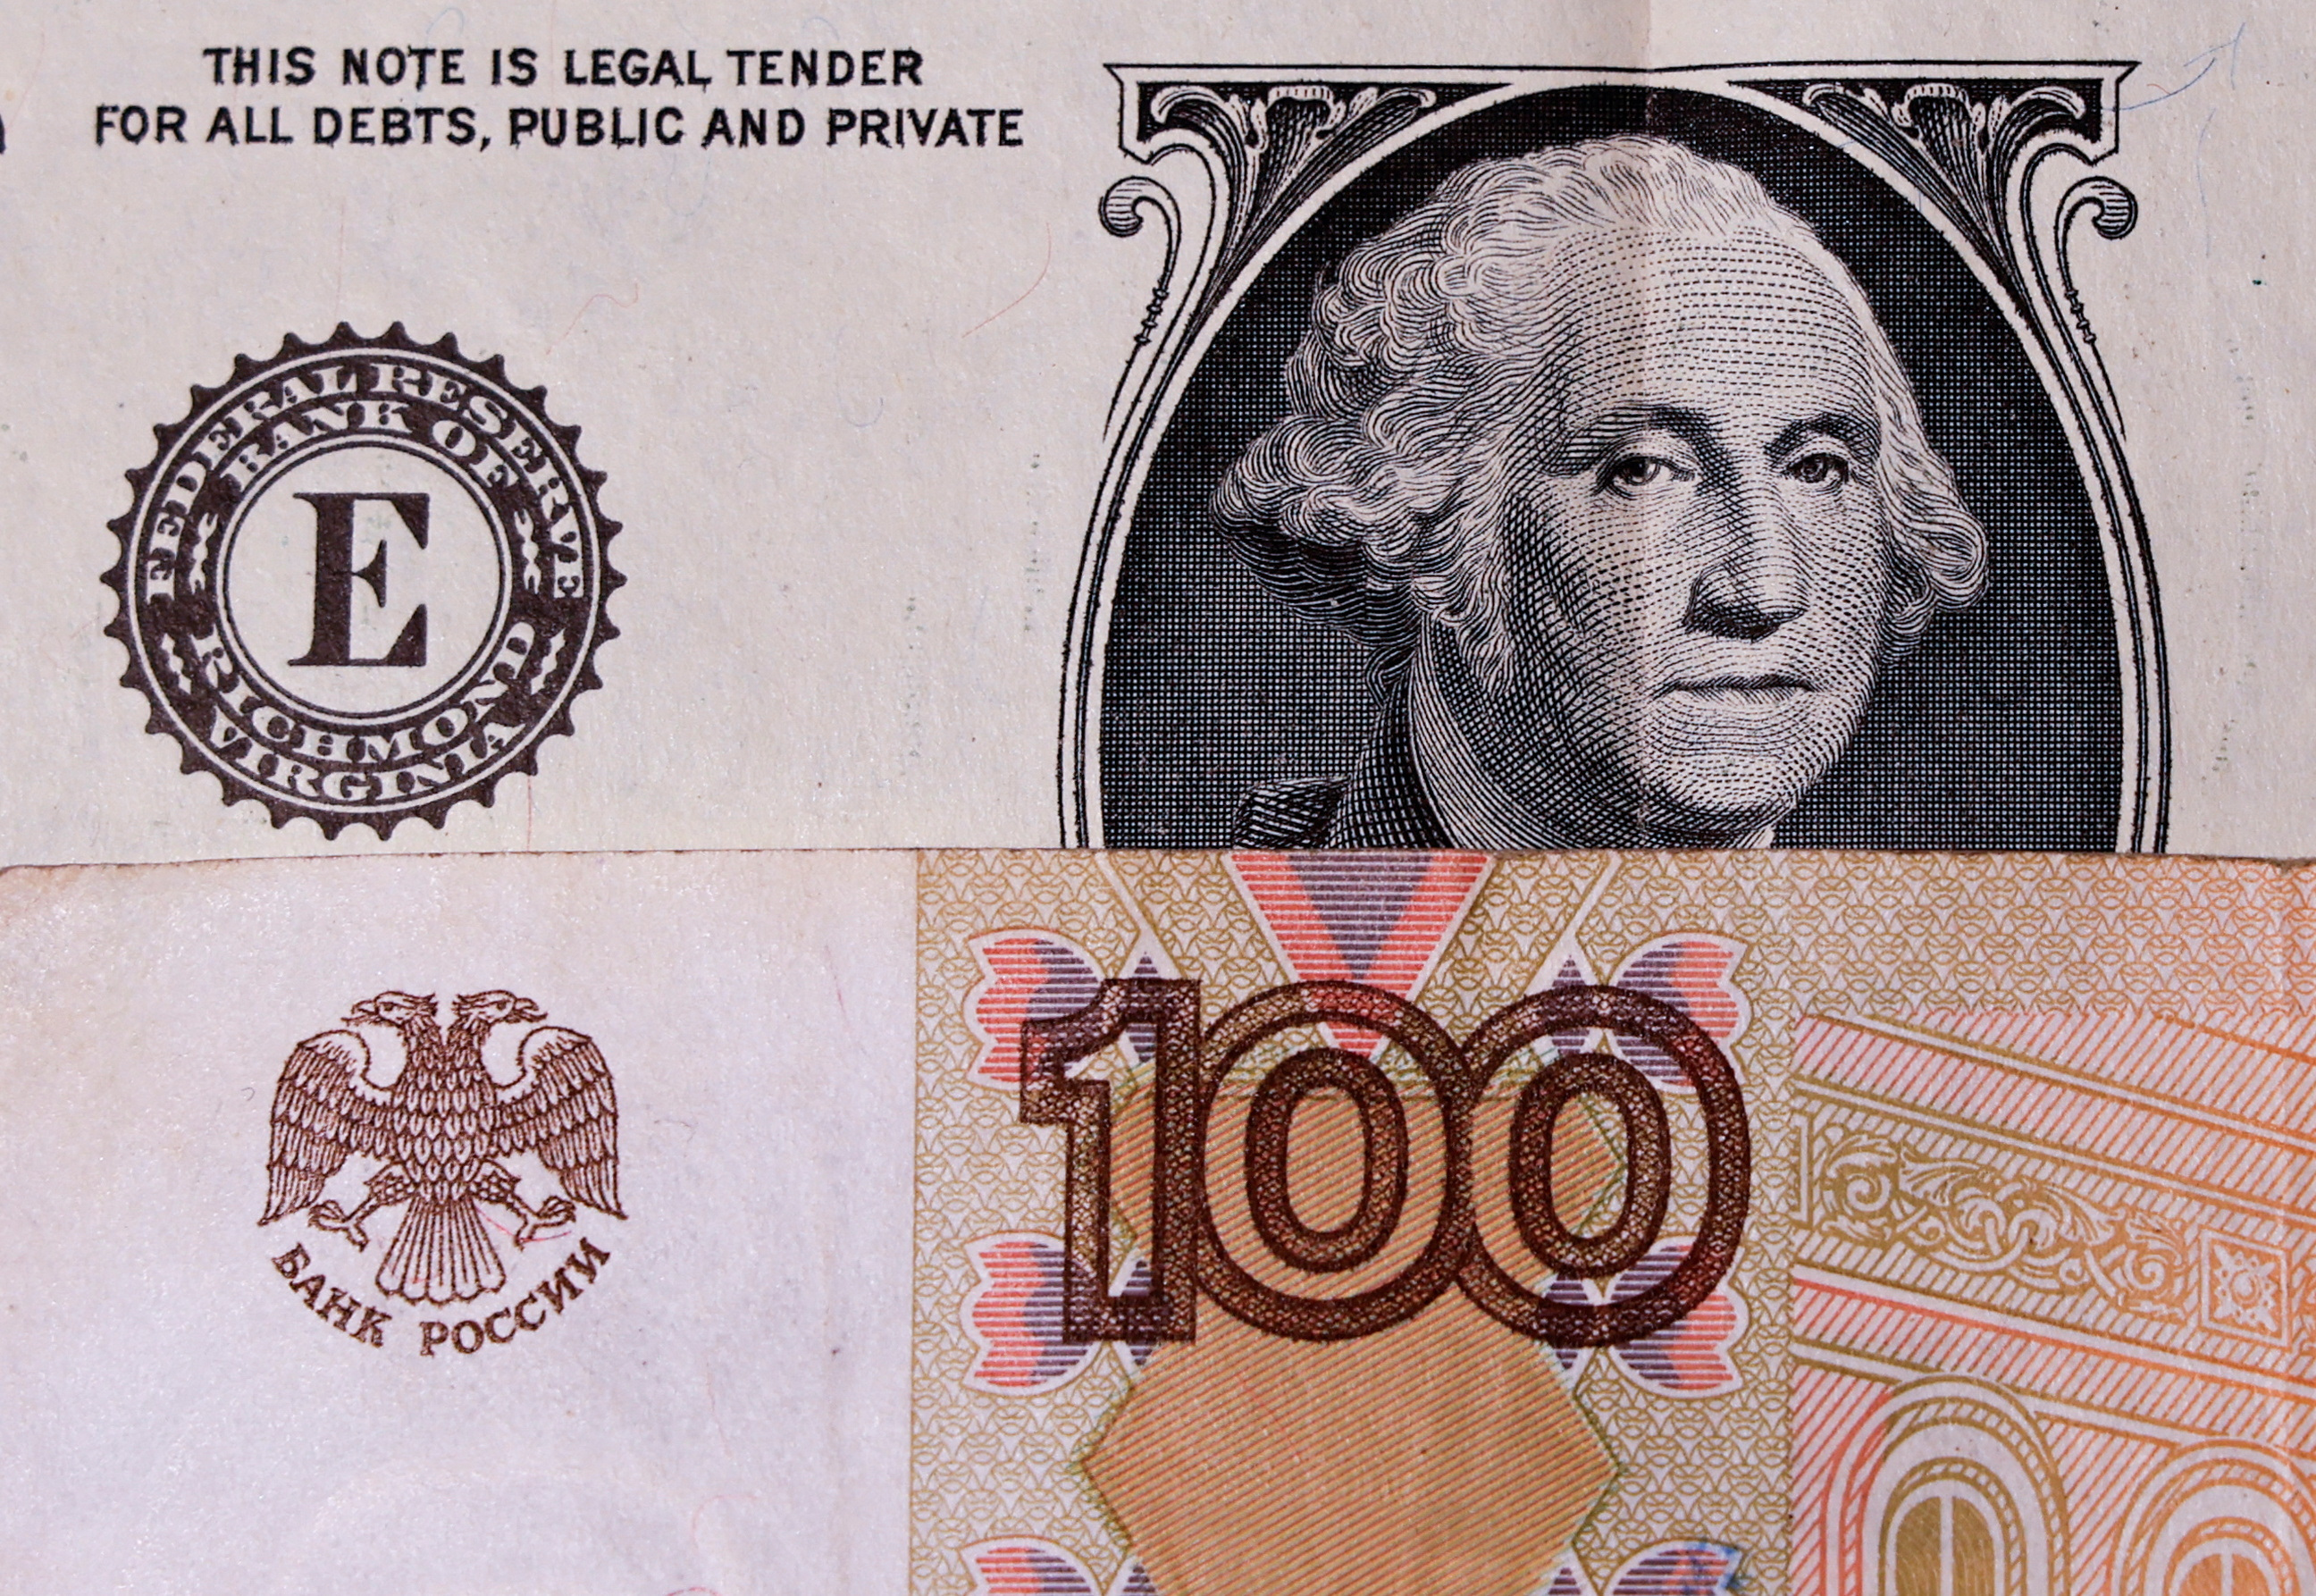 Illustration shows U.S. dollar and Russian rouble banknotes